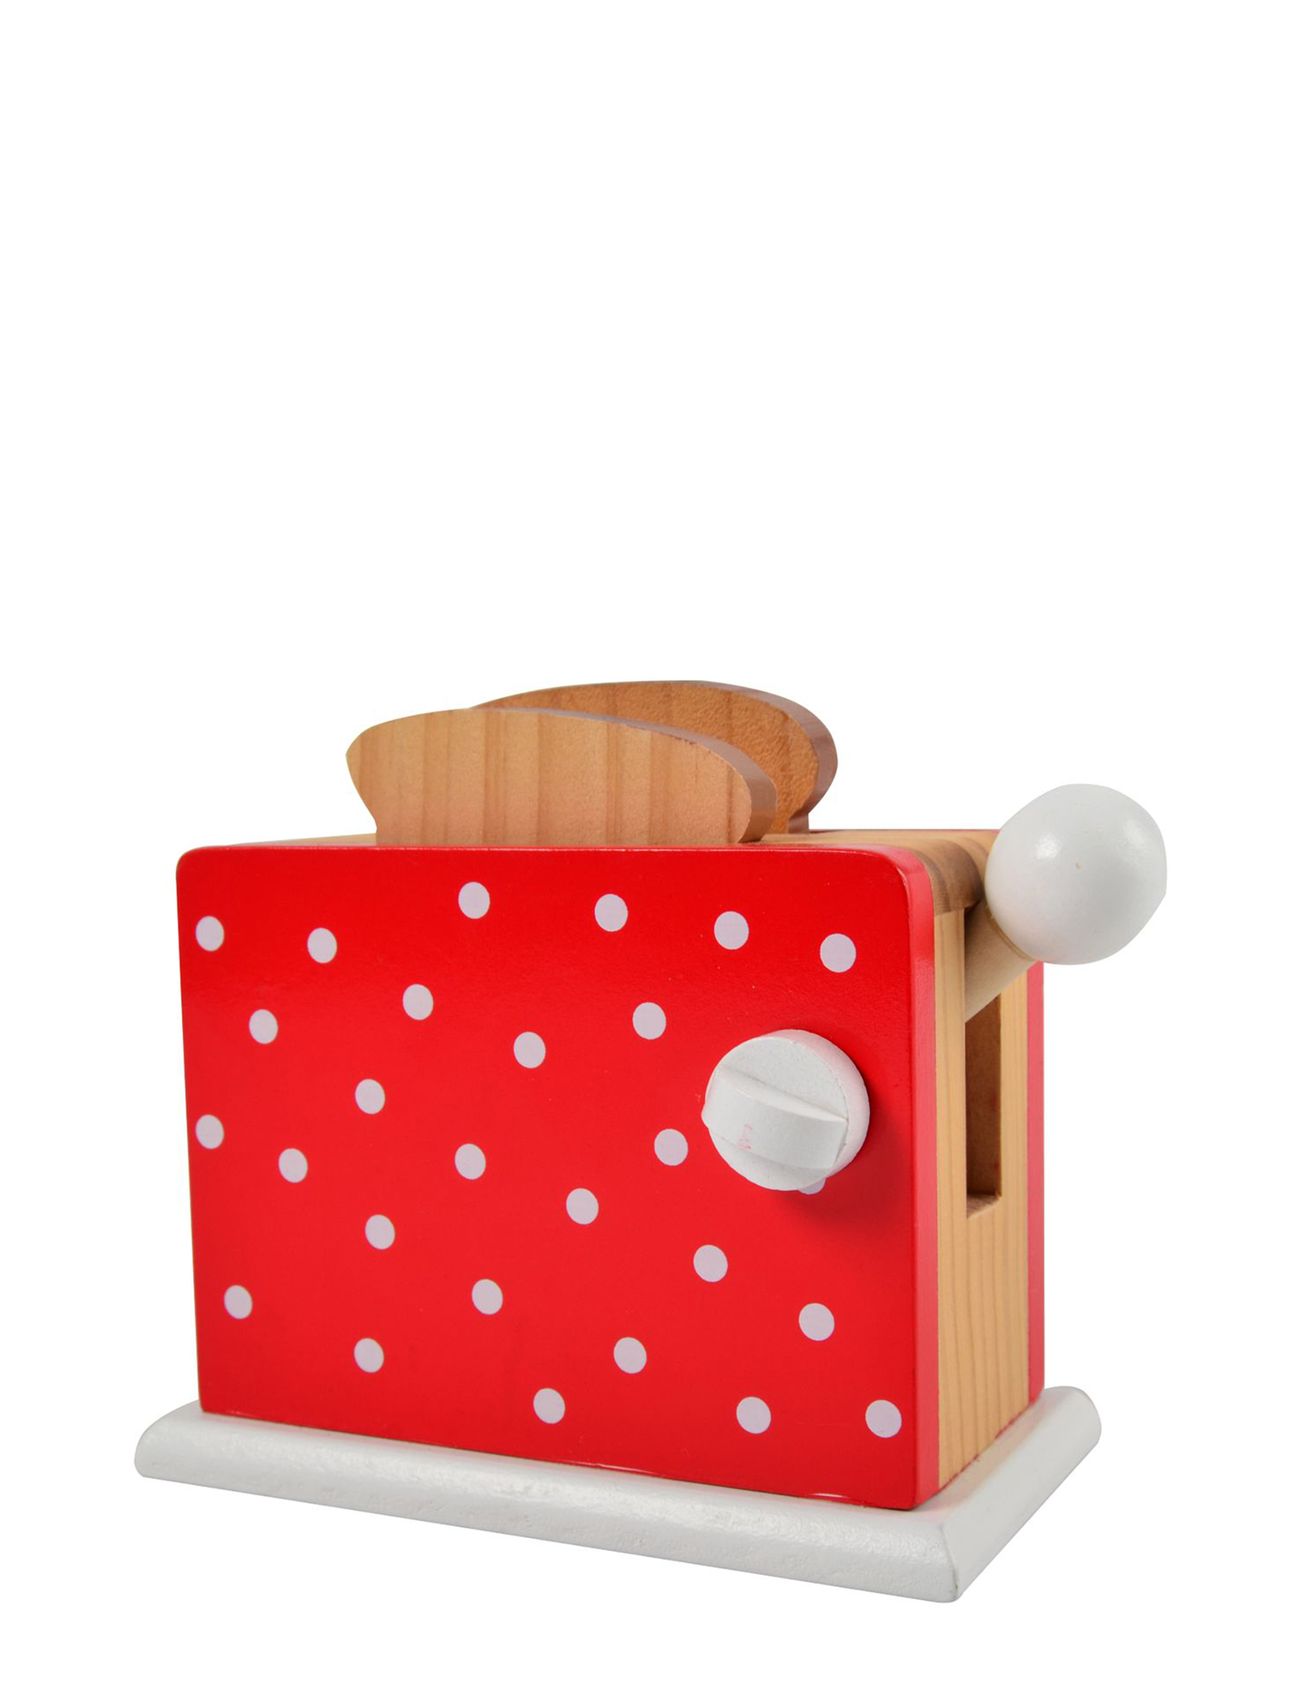 Toaster, Red With Dots Toys Toy Kitchen & Accessories Toy Kitchen Accessories Red Magni Toys